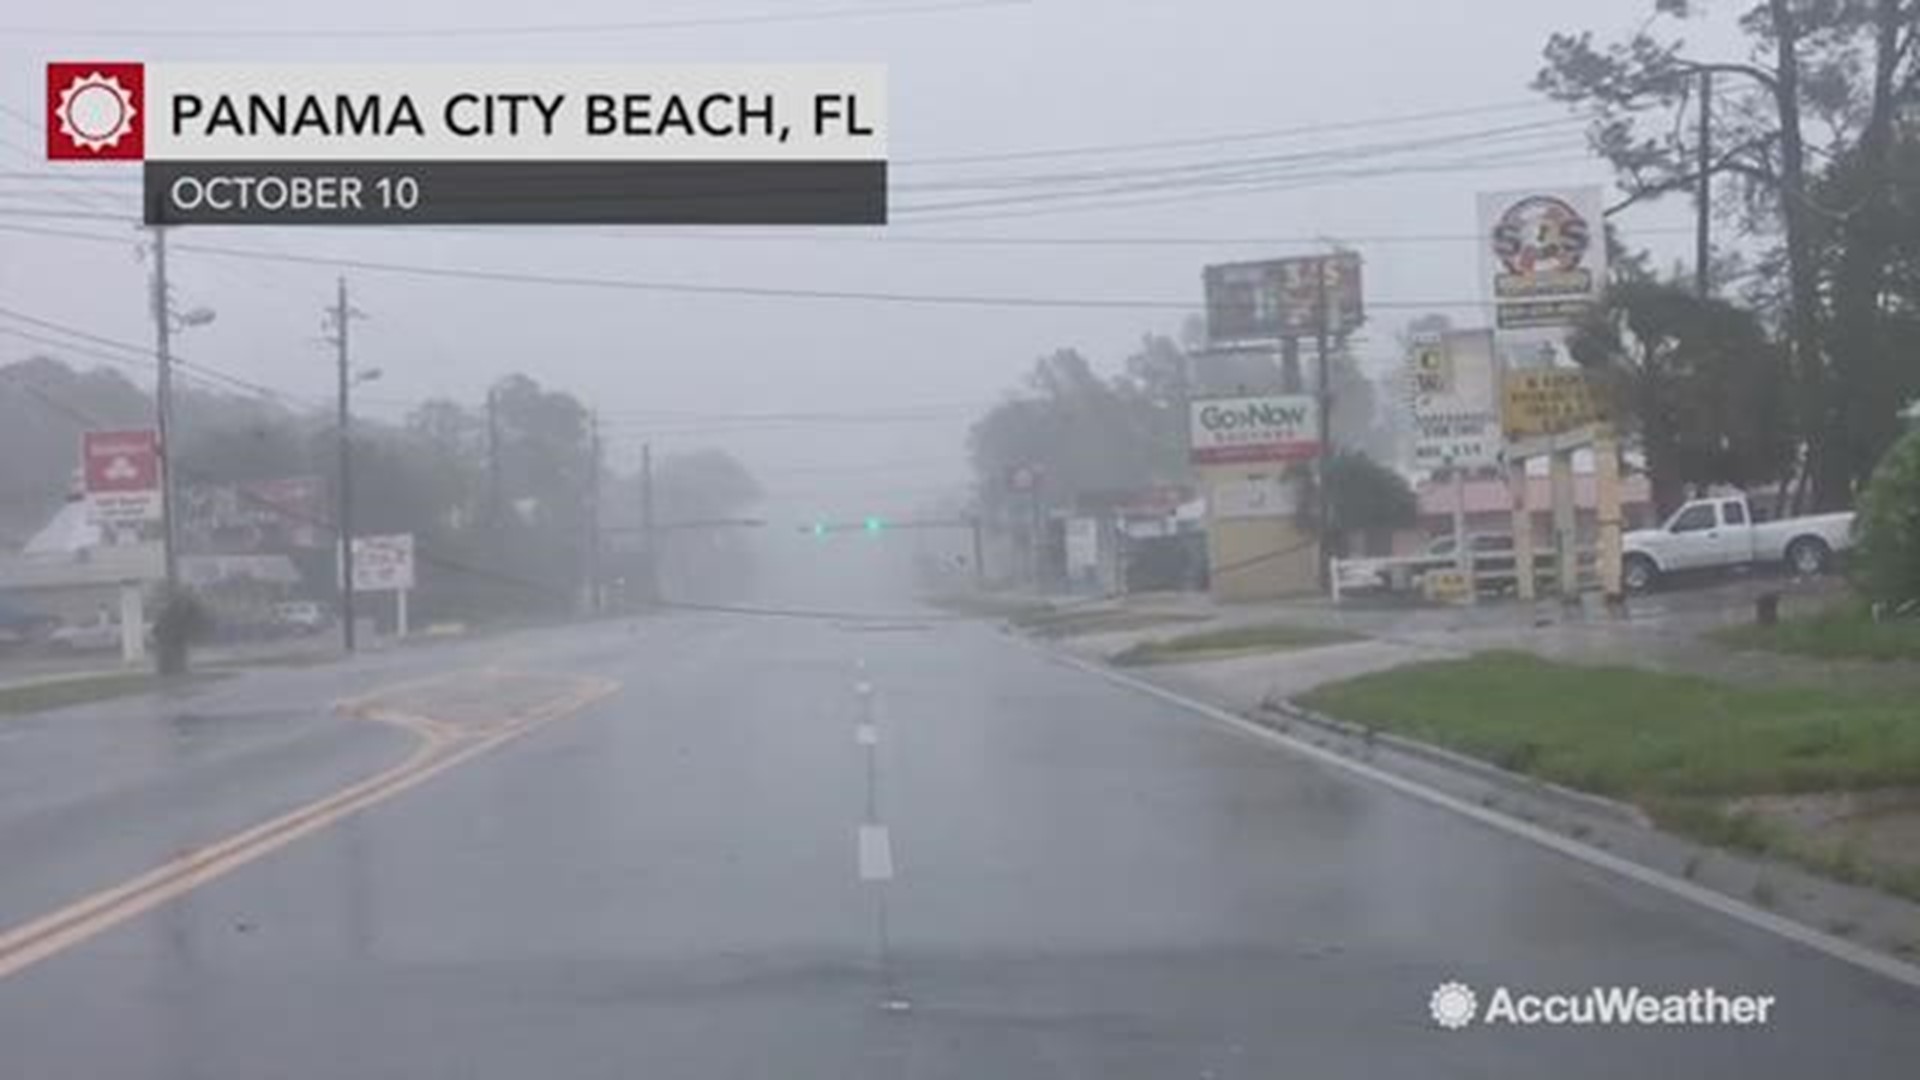 In Panama City Beach, Florida, Hurricane Michael's winds proved to be too much for this power line that's left dangling over a road.